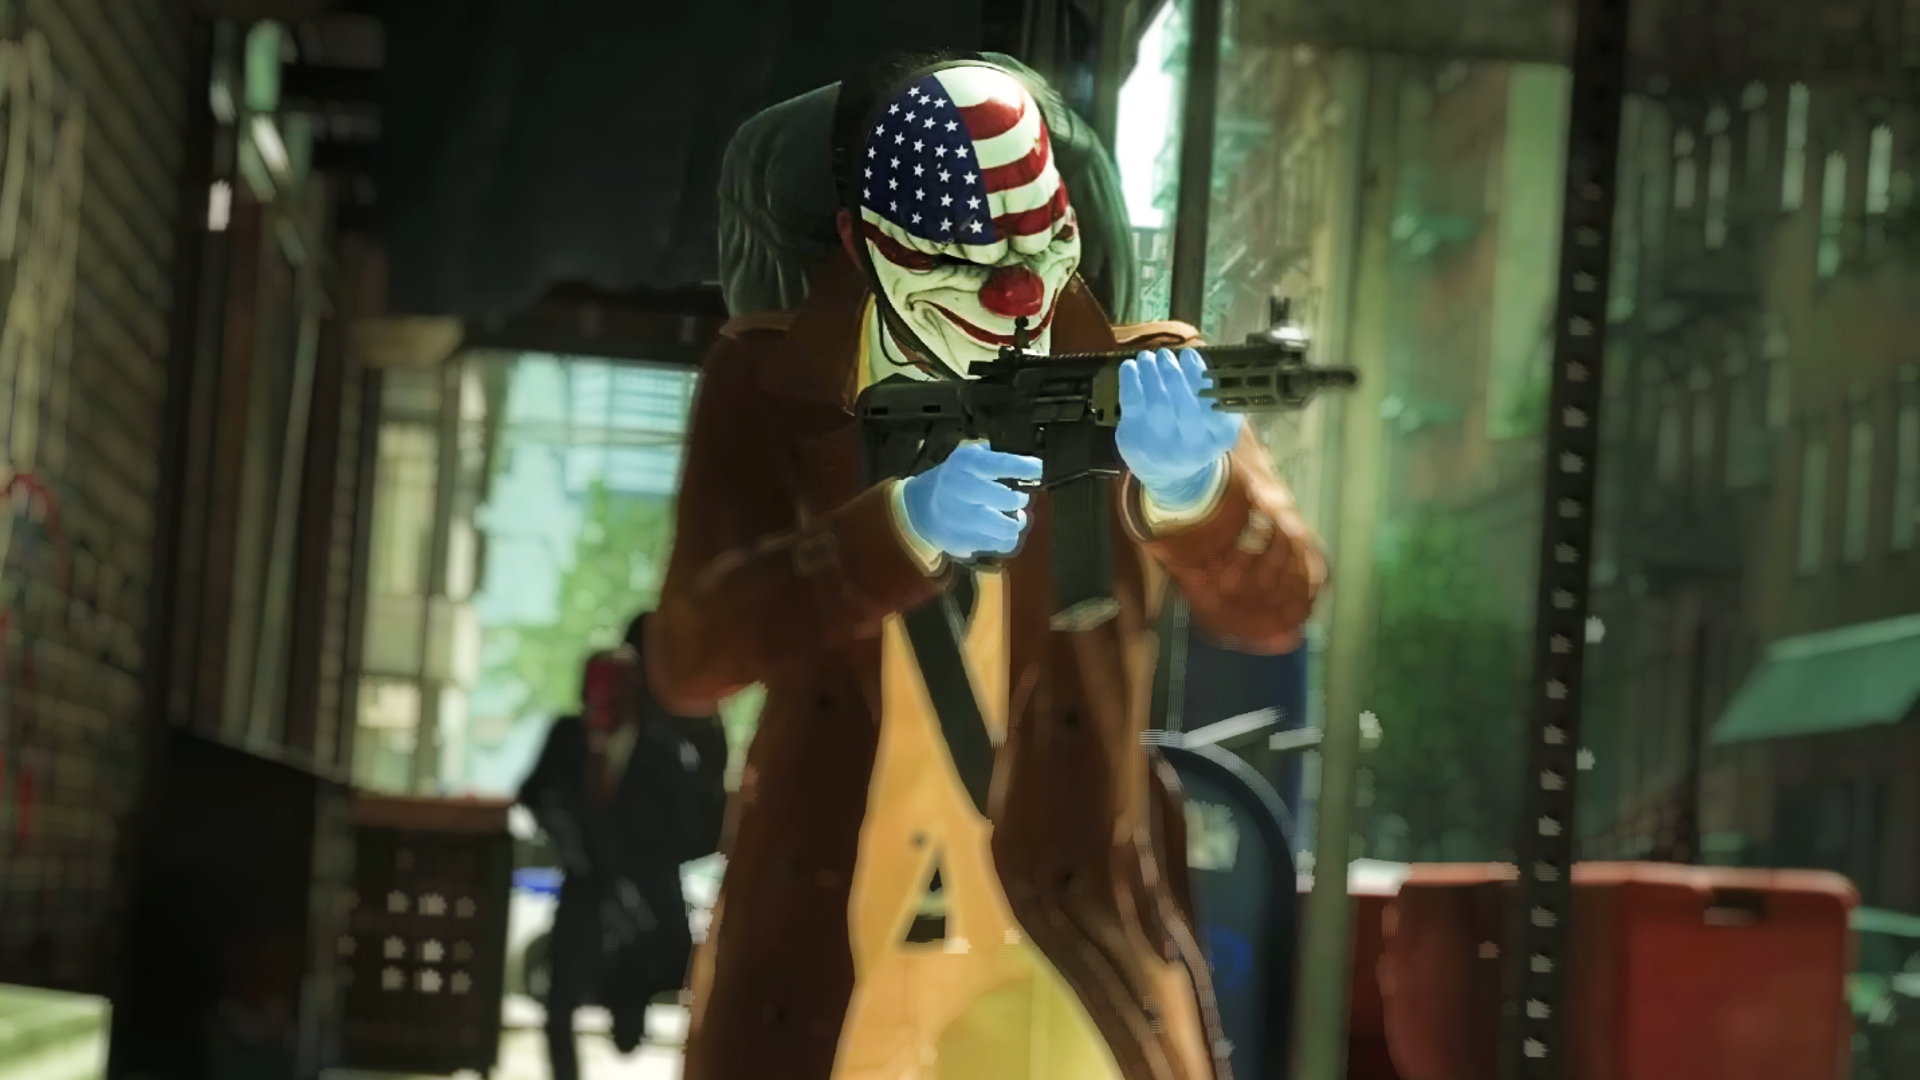 Payday 3 Will Be Set in a 'Living, Enormous' New York City - IGN